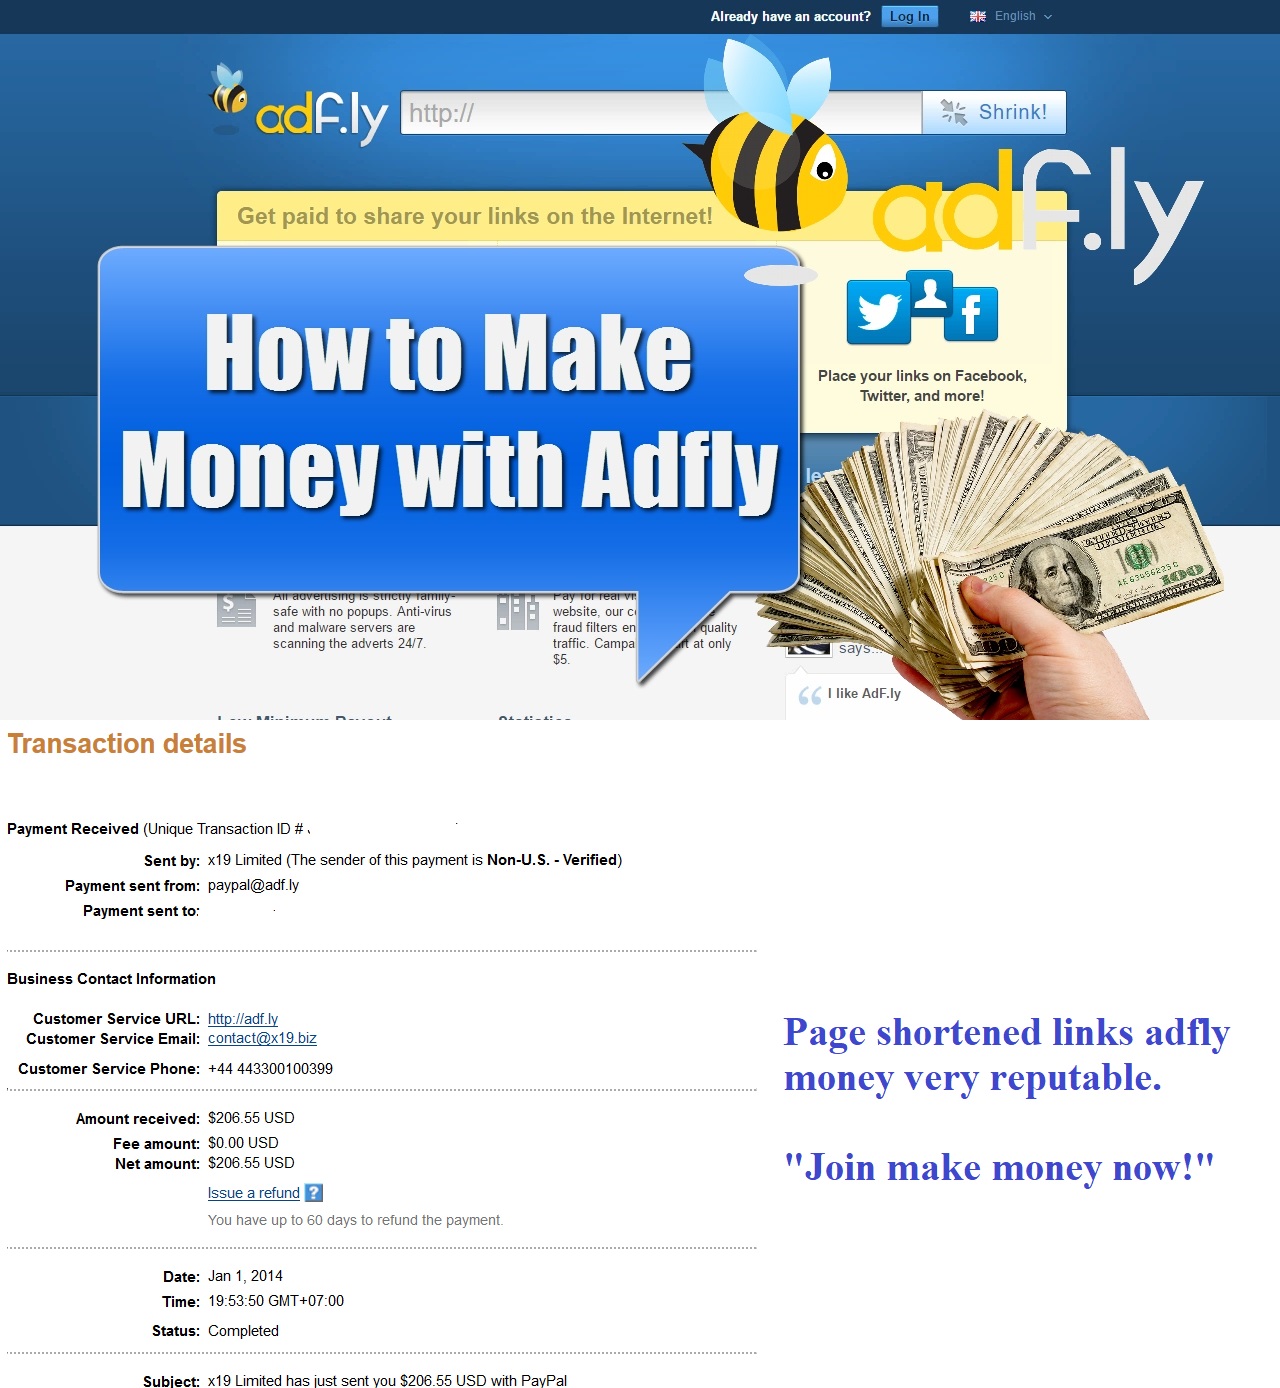 Money with Adfly